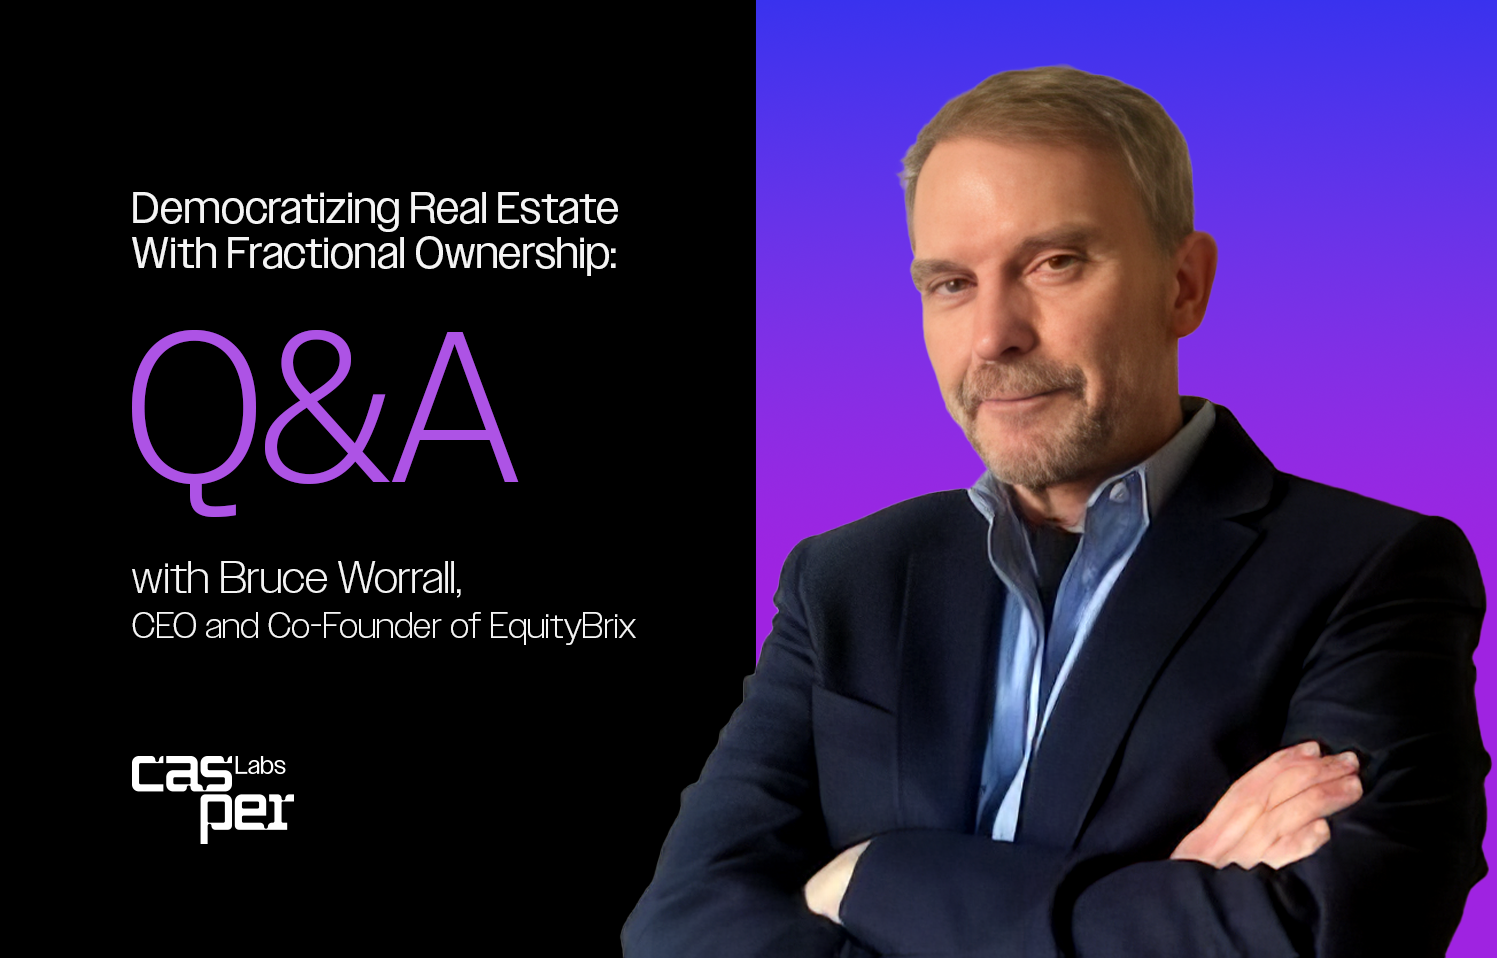 Democratizing Real Estate With Fractional Ownership: Q&A with Bruce Worrall, CEO and Co-Founder of EquityBrix 